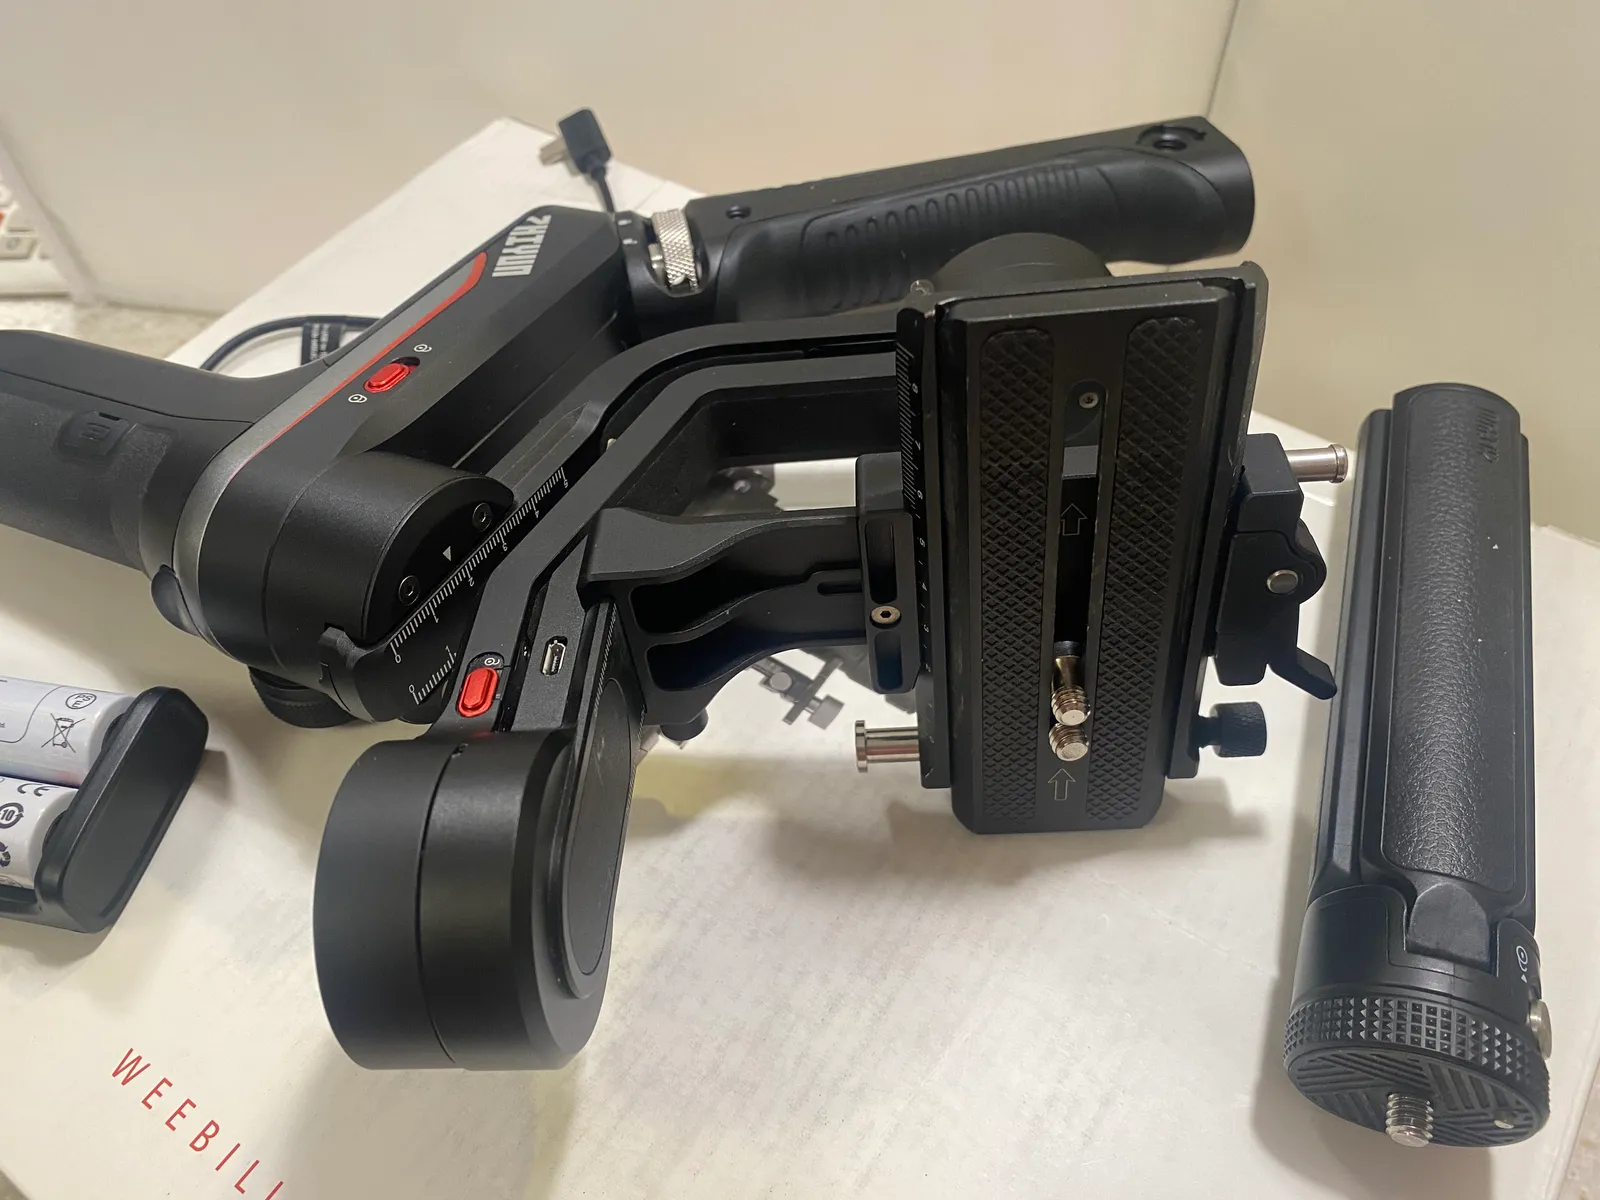 Barely used Zhiyun-Tech WEEBILL-S Handheld Gimbal Stabilizer From